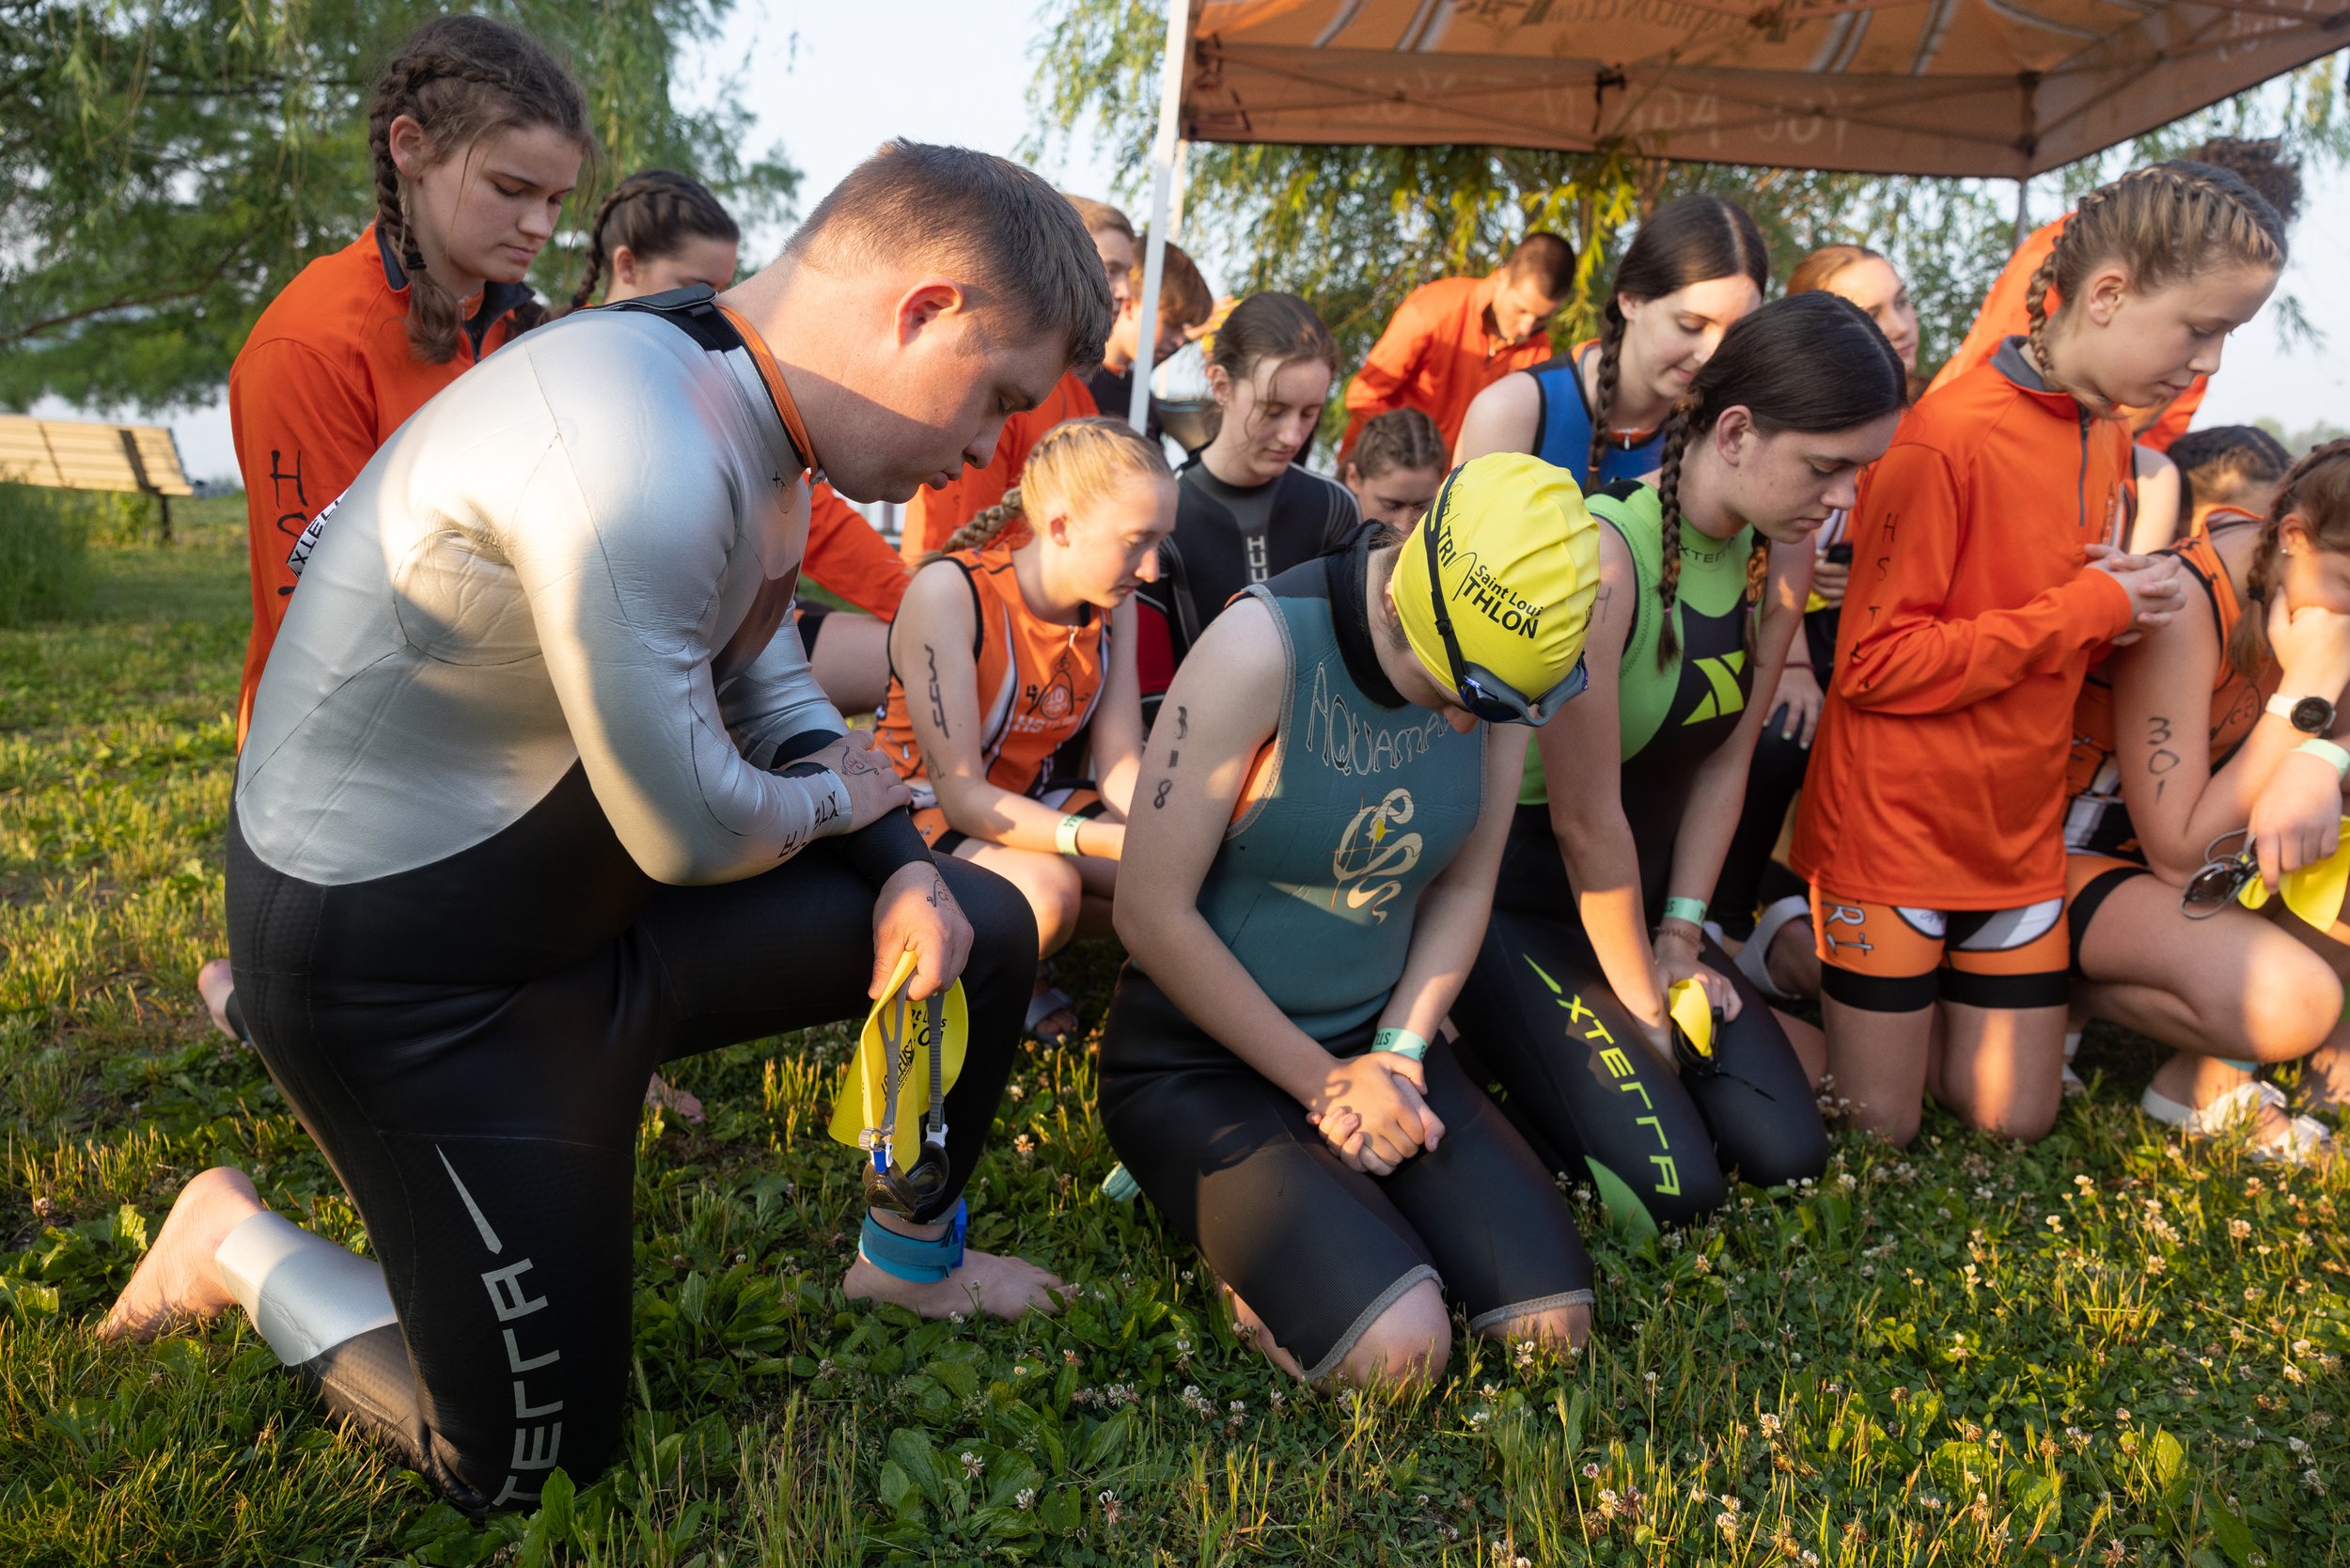  Gabriel knelt during a prayer with other members of the High School Triathlon Club before his second triathlon of the year May 21 at Creve Coeur Lake.  